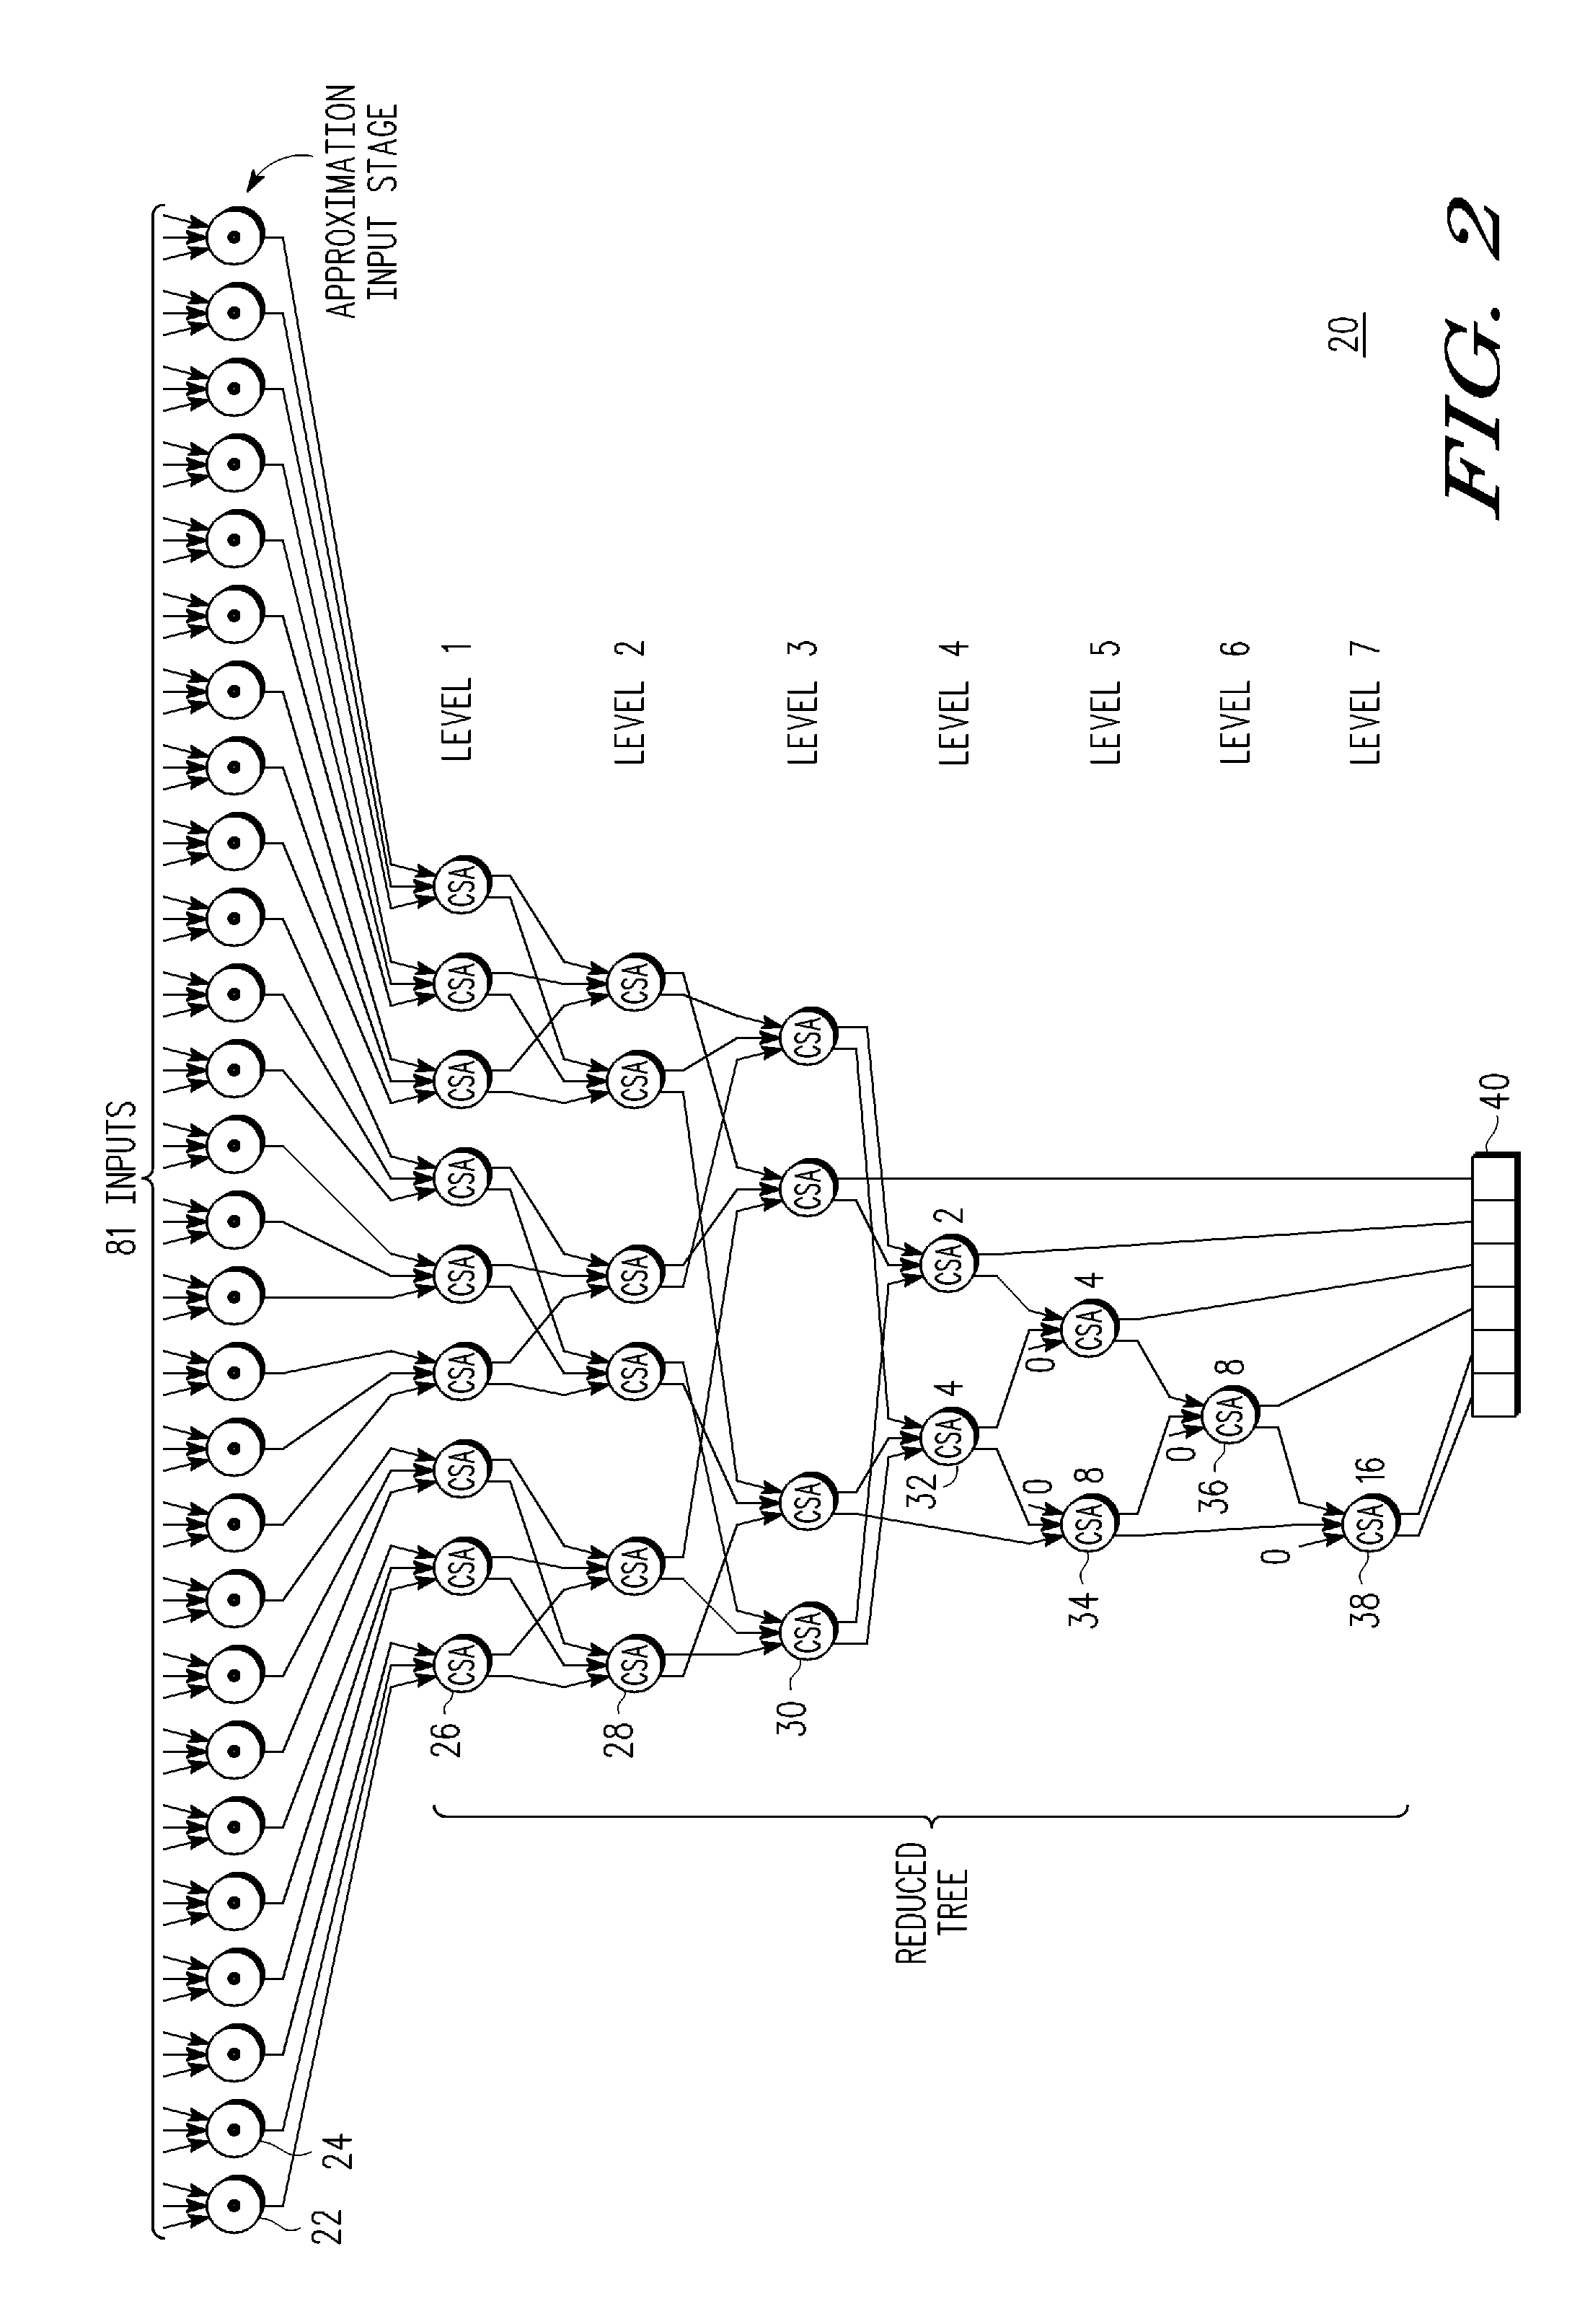 Circuit and method for correlated inputs to a population count circuit